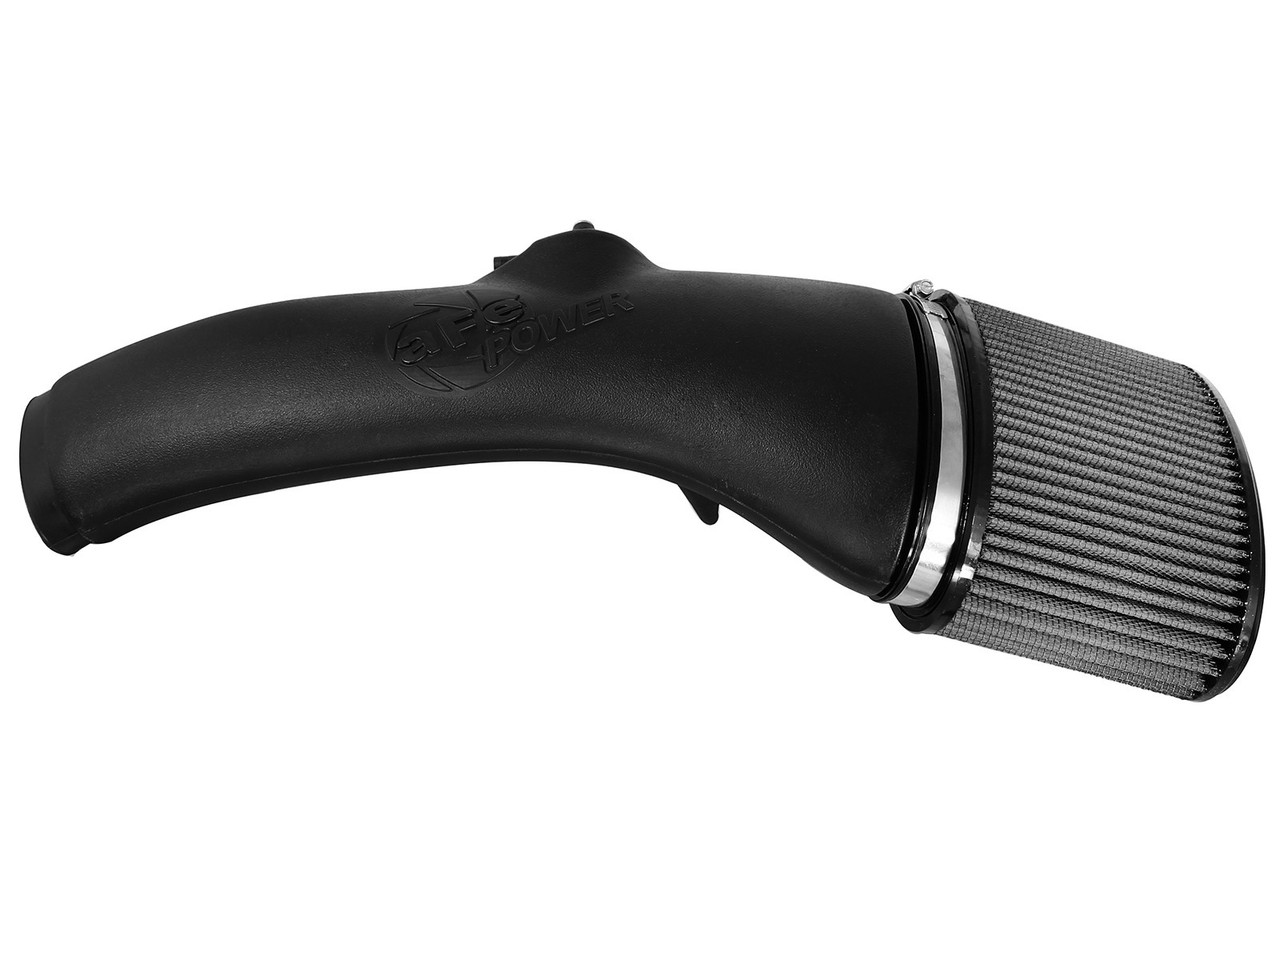 BMW Magnum FORCE Stage-2 Cold Air Intake System w/ Pro DRY S Filter Media - aFe POWER 51-31912